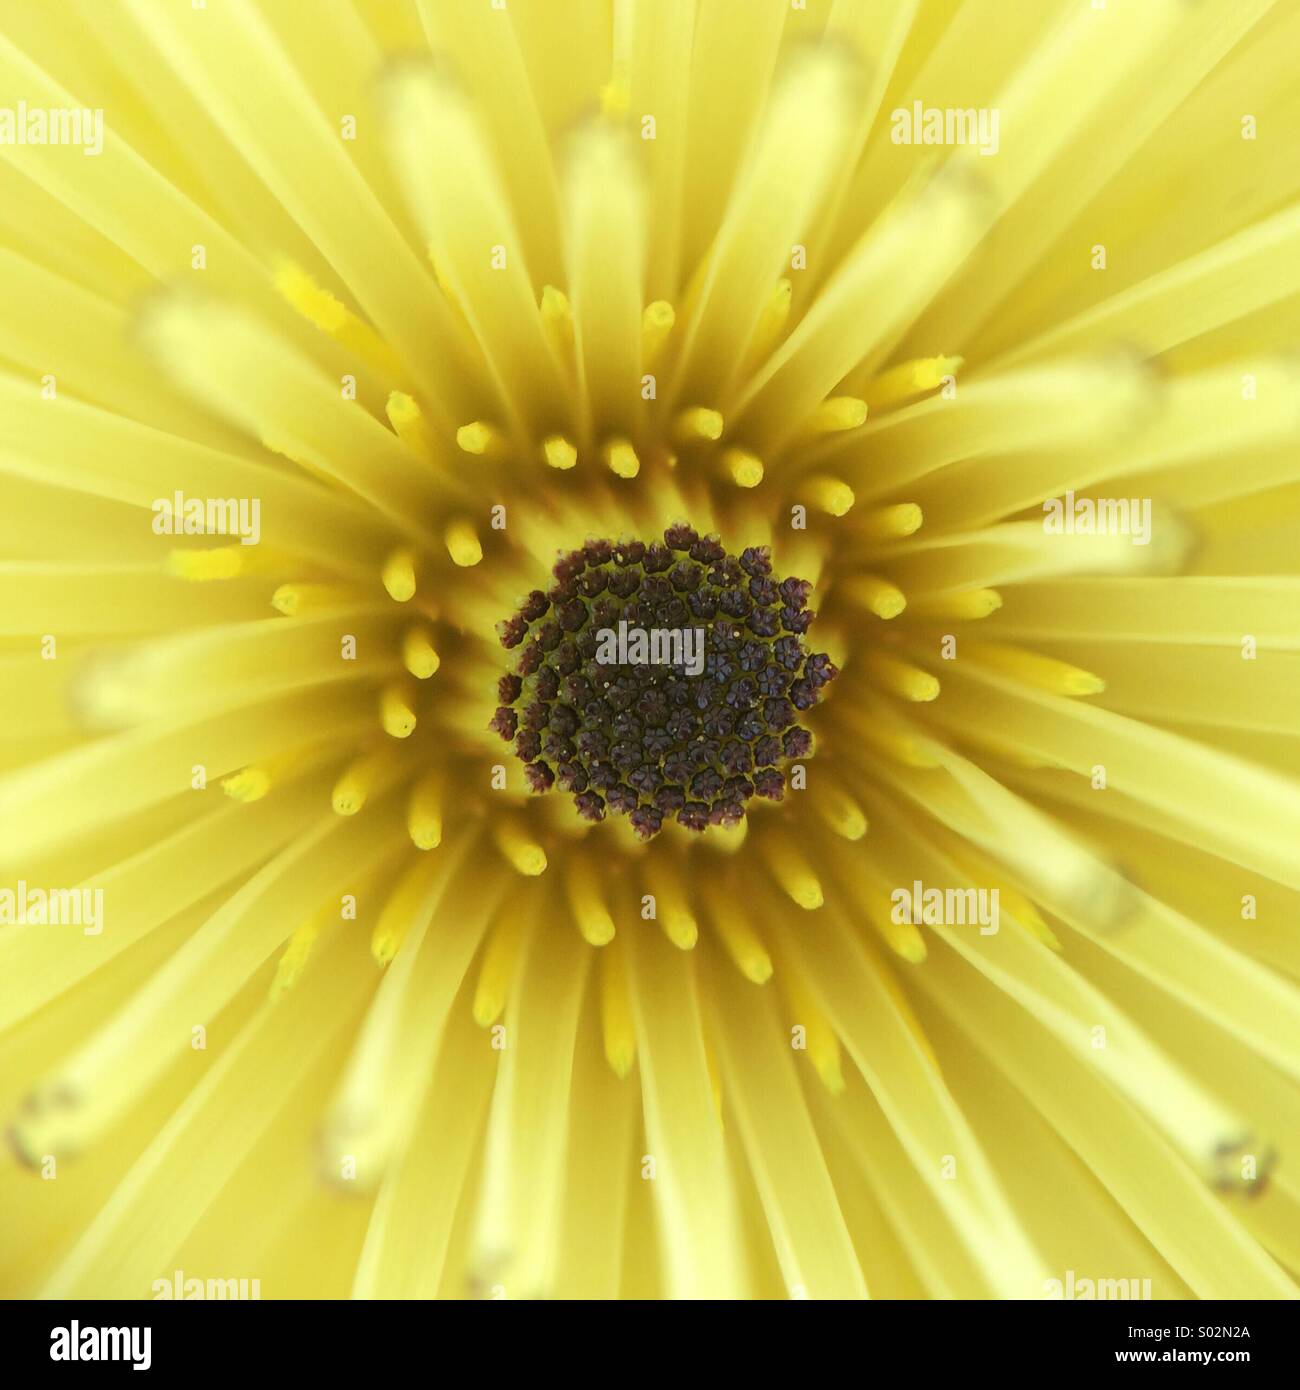 Macro of the center of a yellow flower with multiple petals. Stock Photo